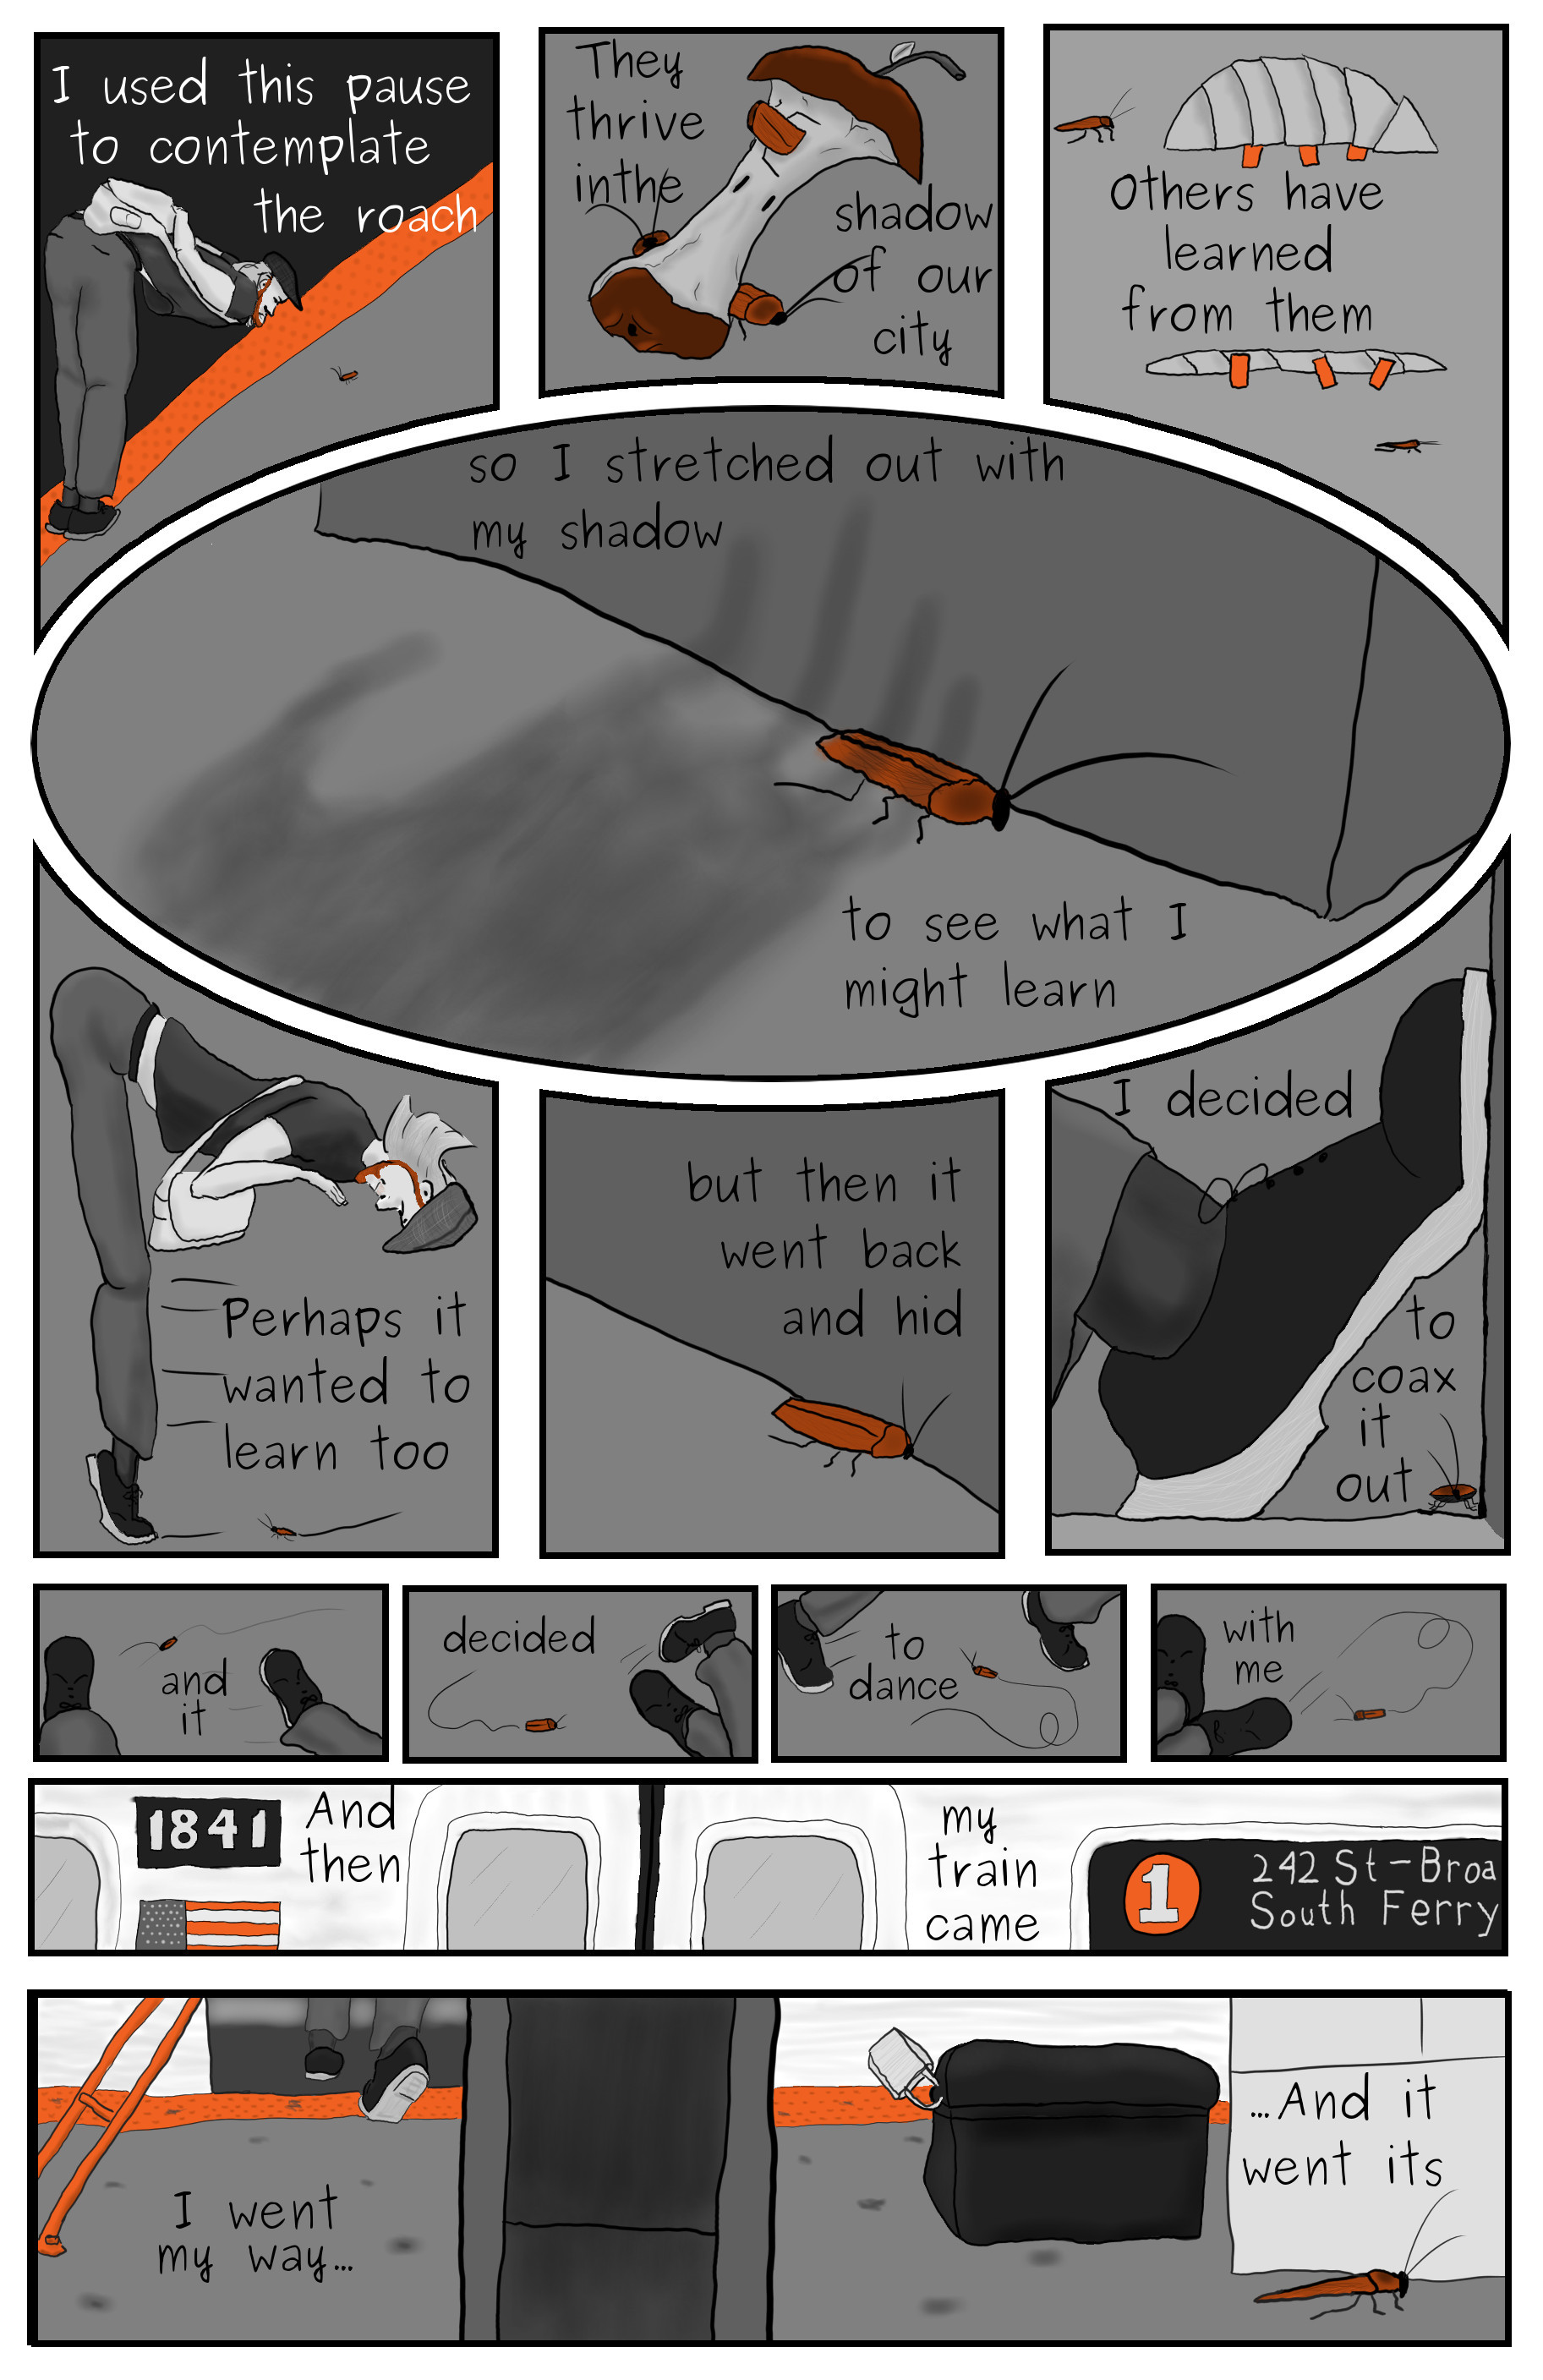 A thirteen panel comic page featuring Phillip Gerba dancing with a cockroach on a NYC subway platform, followed by the 1 train arriving and Phillip and the cockroach going their separate ways.